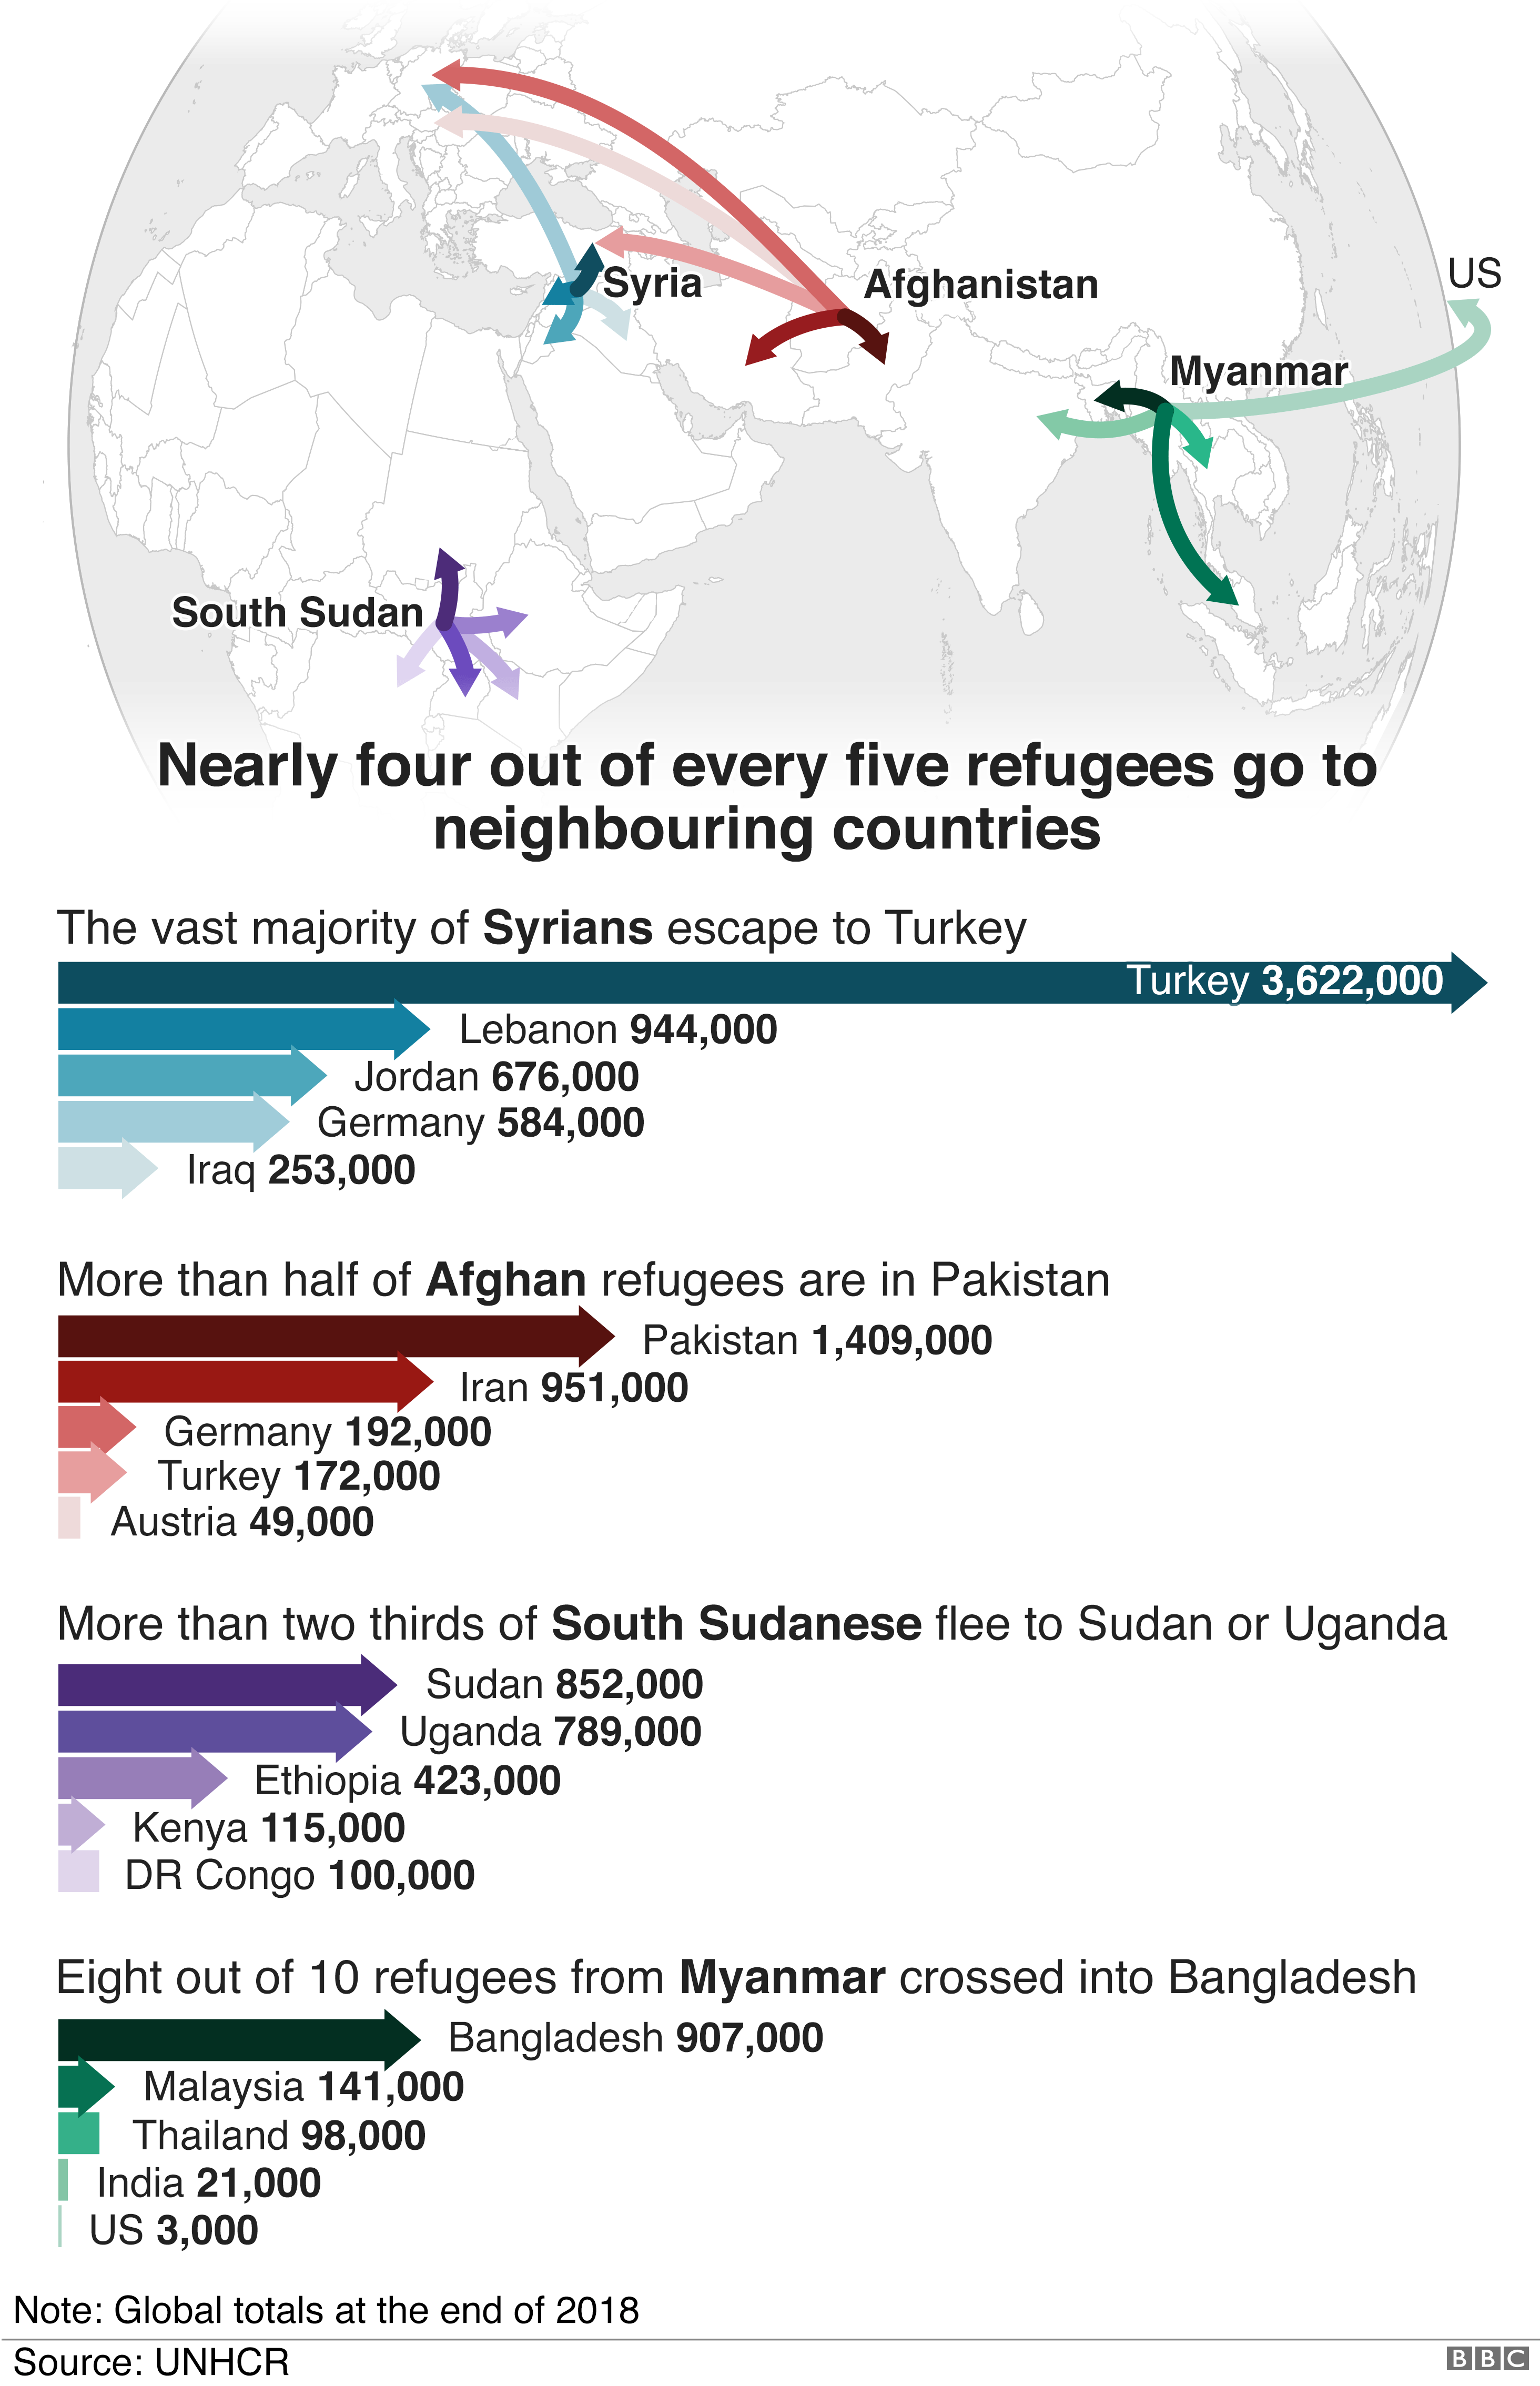 Maps showing where refugees travel to, with most Syrians moving to Turkey, Afghans to Pakistan, South Sudanese to Sudan or Uganda and those from Myanmar cross into Banglandesh